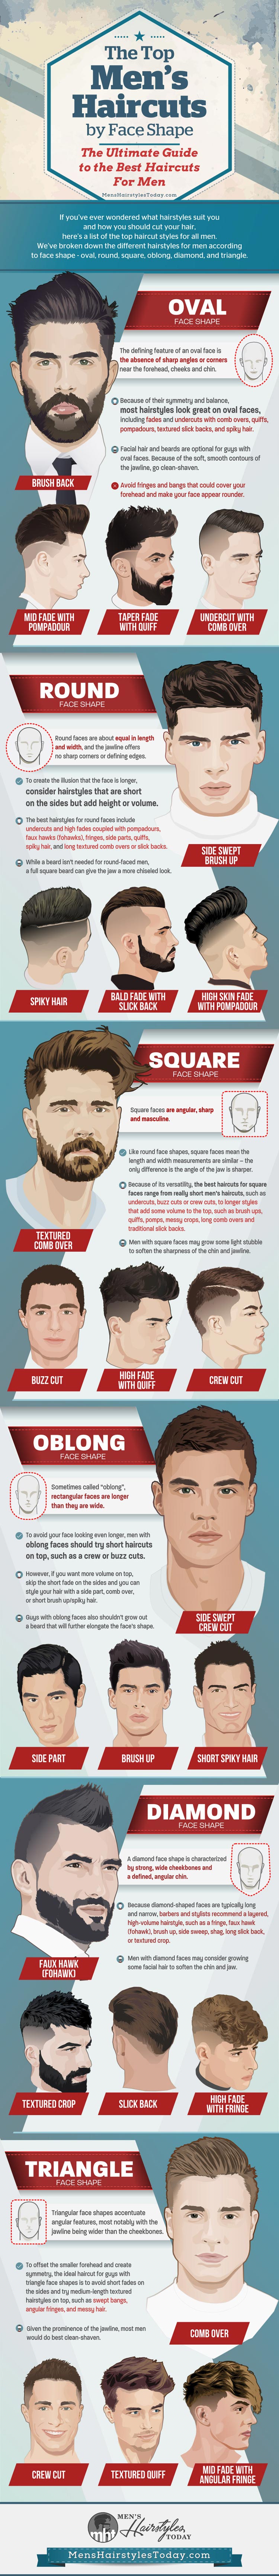 Best Mens Hairstyles by Face Shape